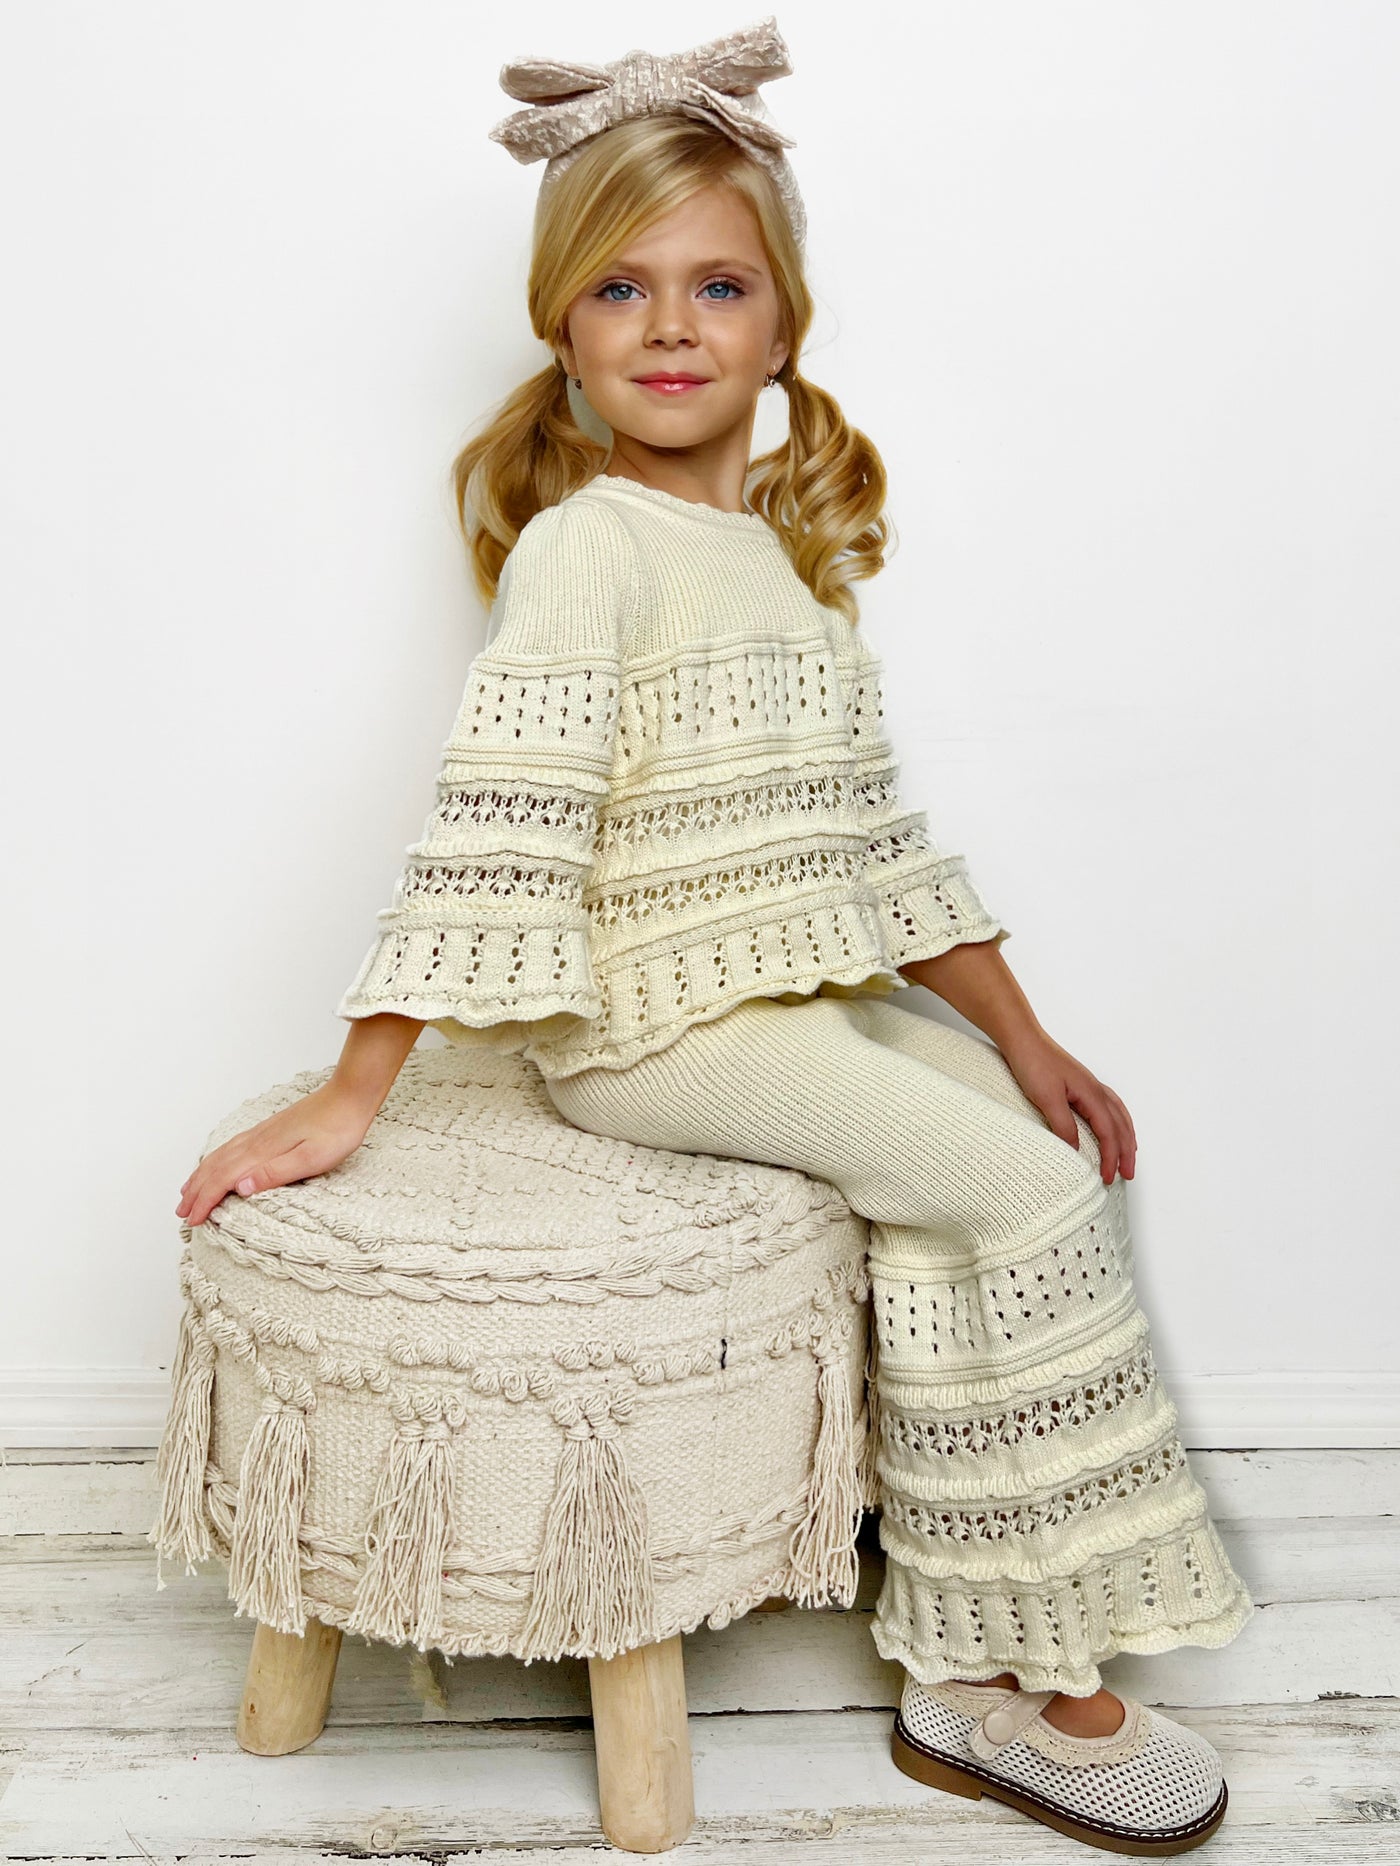 Mia Belle Girls Knitted Pants Set | Girls Cozy Fall